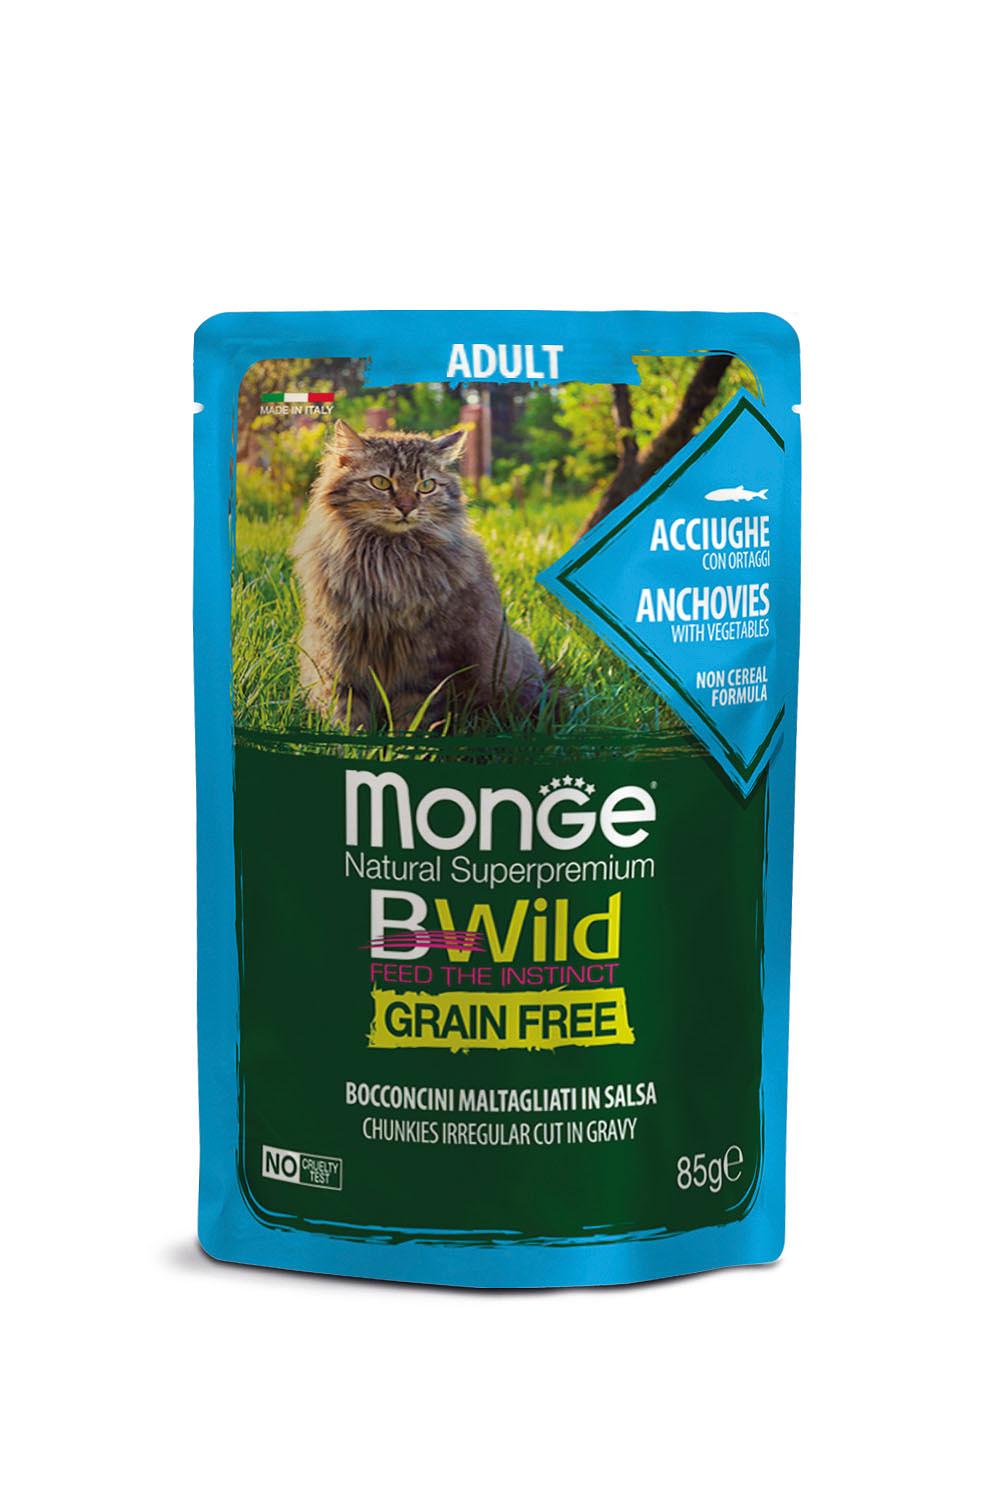 Monge Chat Bwild Anchois adultes 85g